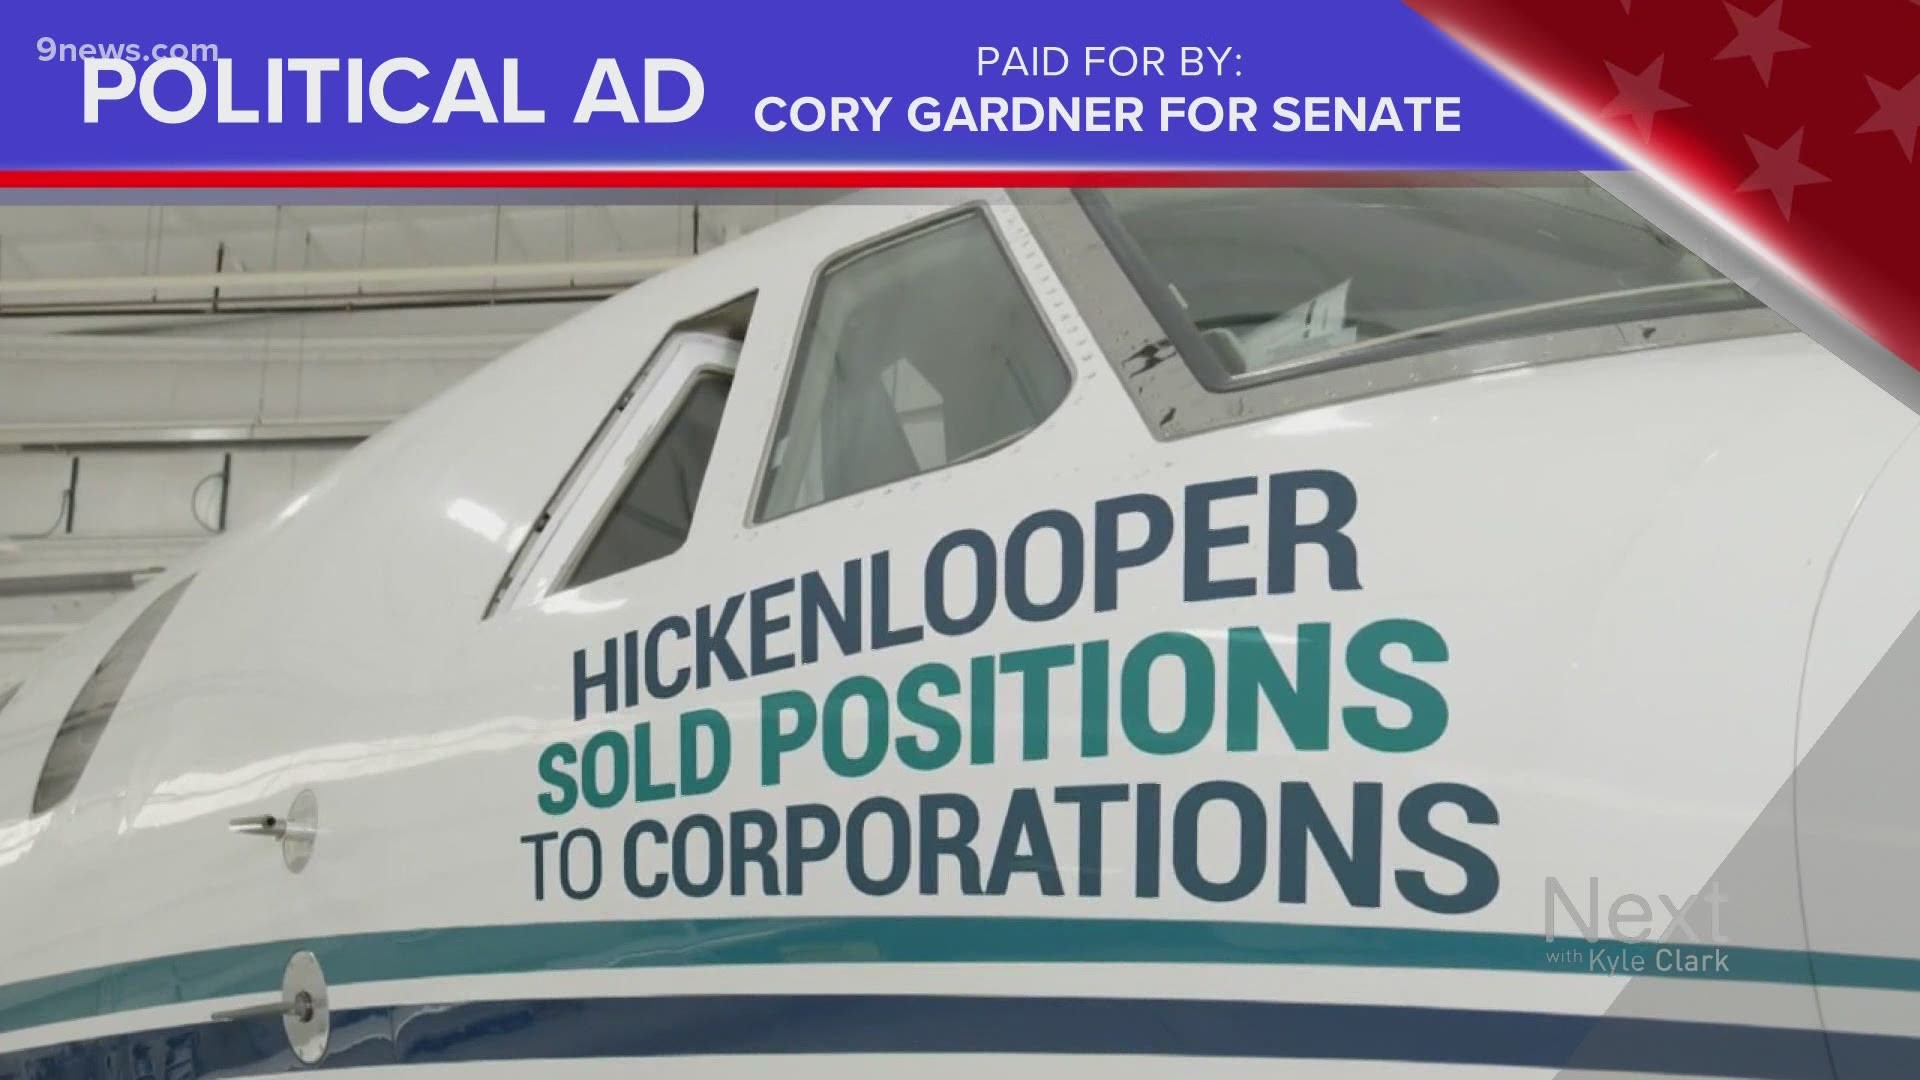 Republican Sen. Cory Gardner goes after ethics complaints made against his challenger John Hickenlooper, which involved a private jet and a Maserati limo.